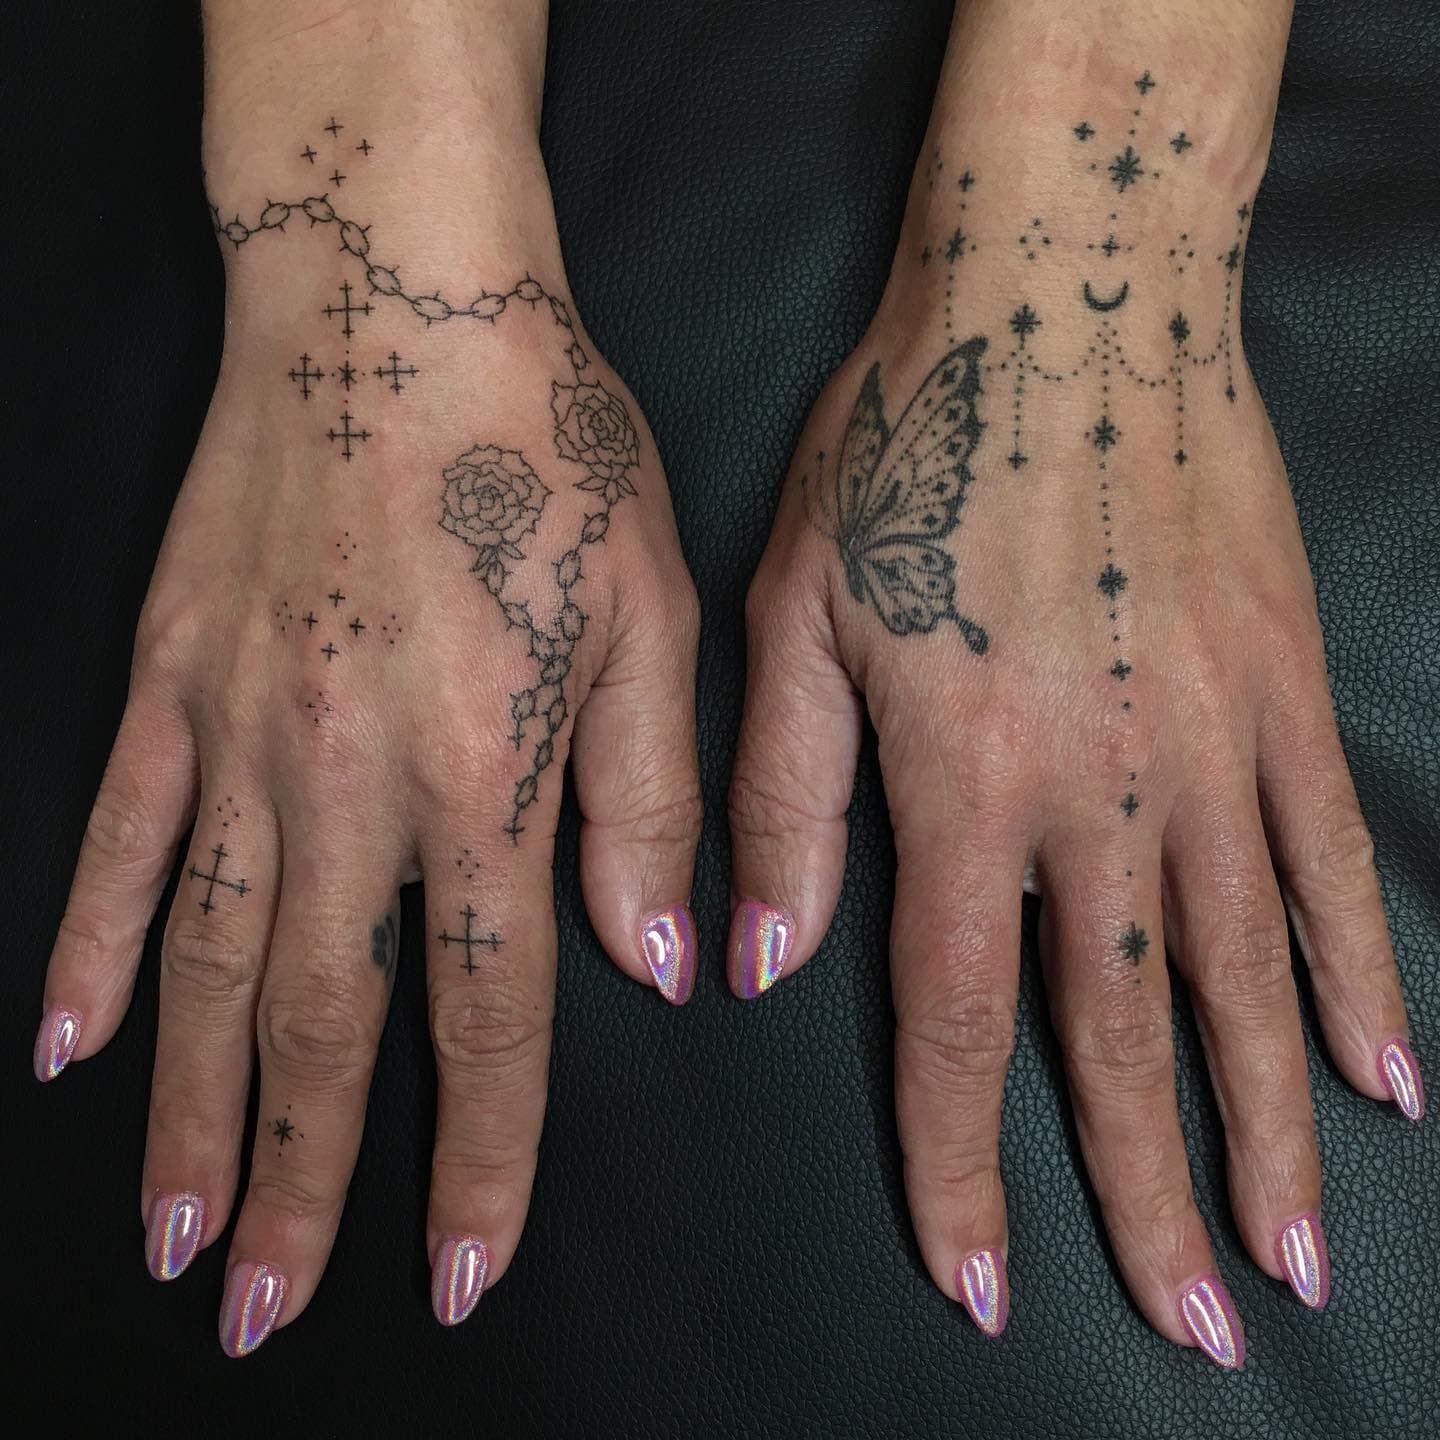 Everything You Need to Know About Stick and Poke Tattoos